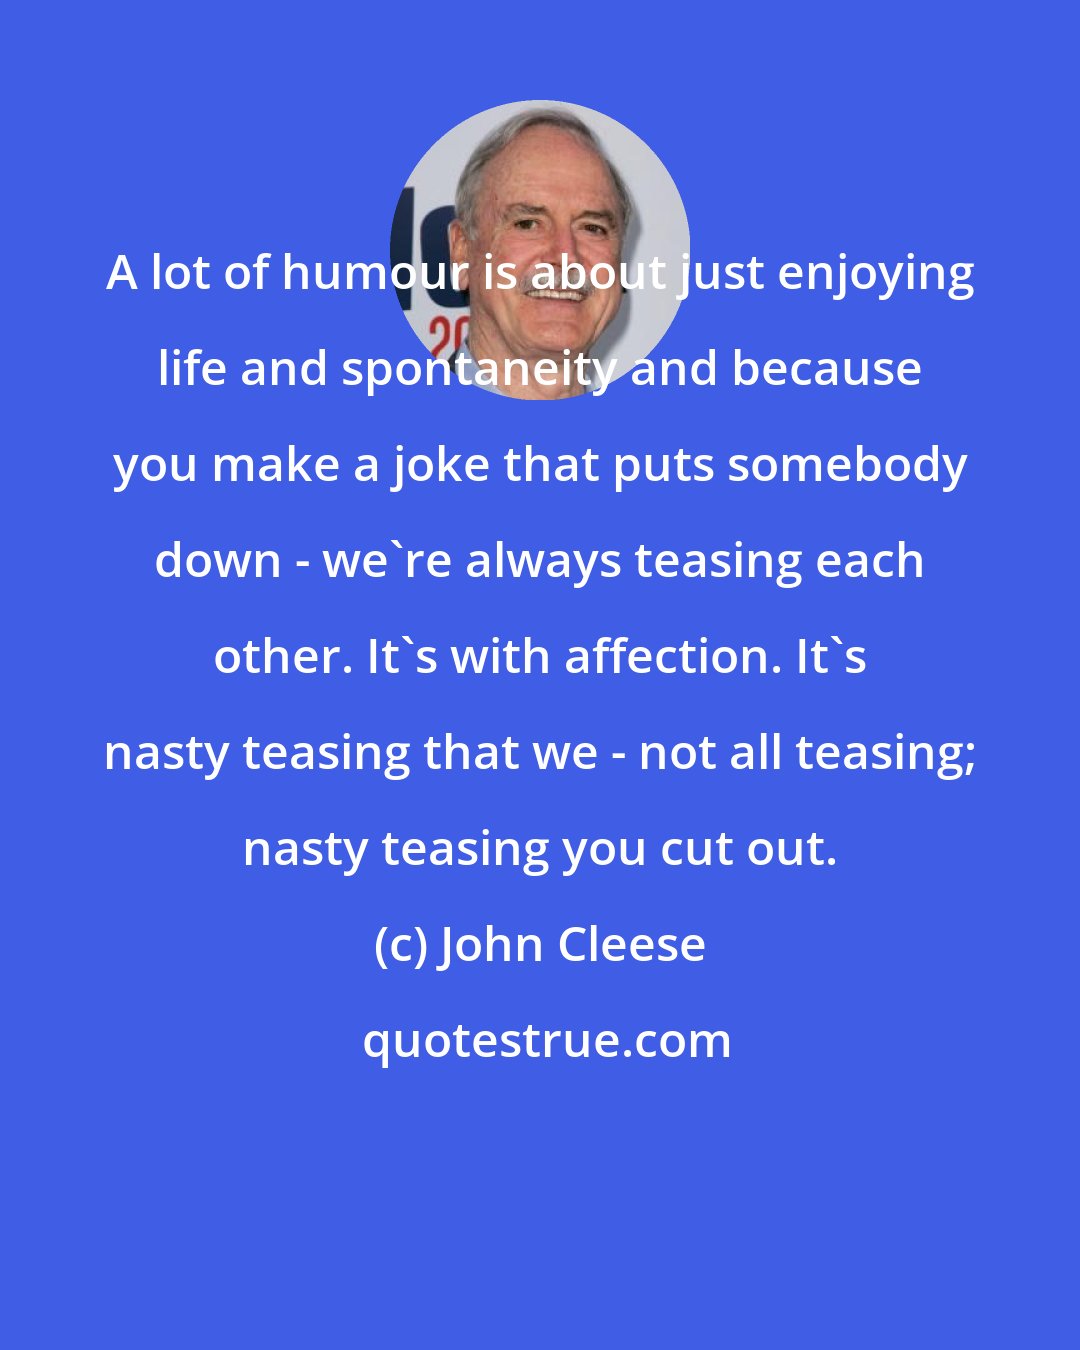 John Cleese: A lot of humour is about just enjoying life and spontaneity and because you make a joke that puts somebody down - we're always teasing each other. It's with affection. It's nasty teasing that we - not all teasing; nasty teasing you cut out.